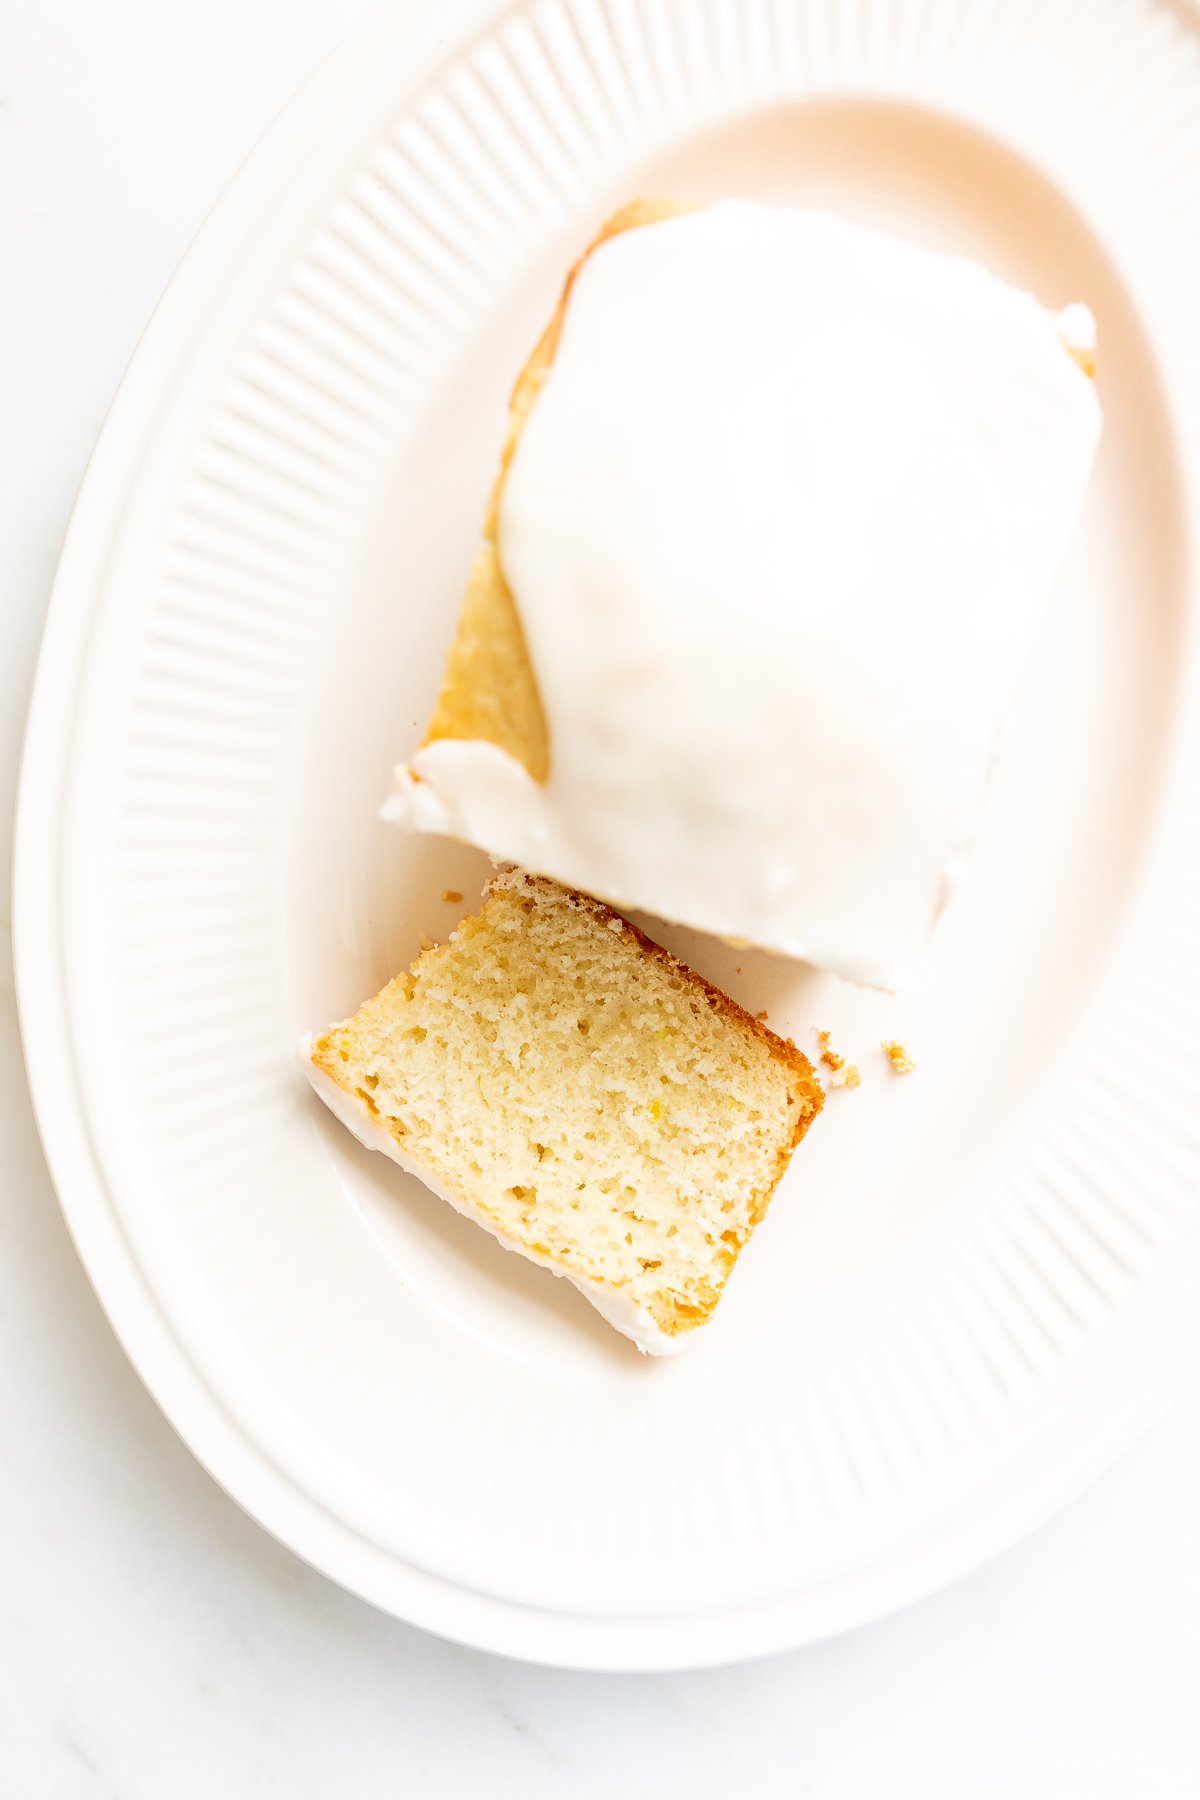 A frosted lemon loaf on a white platter, one slice cut.